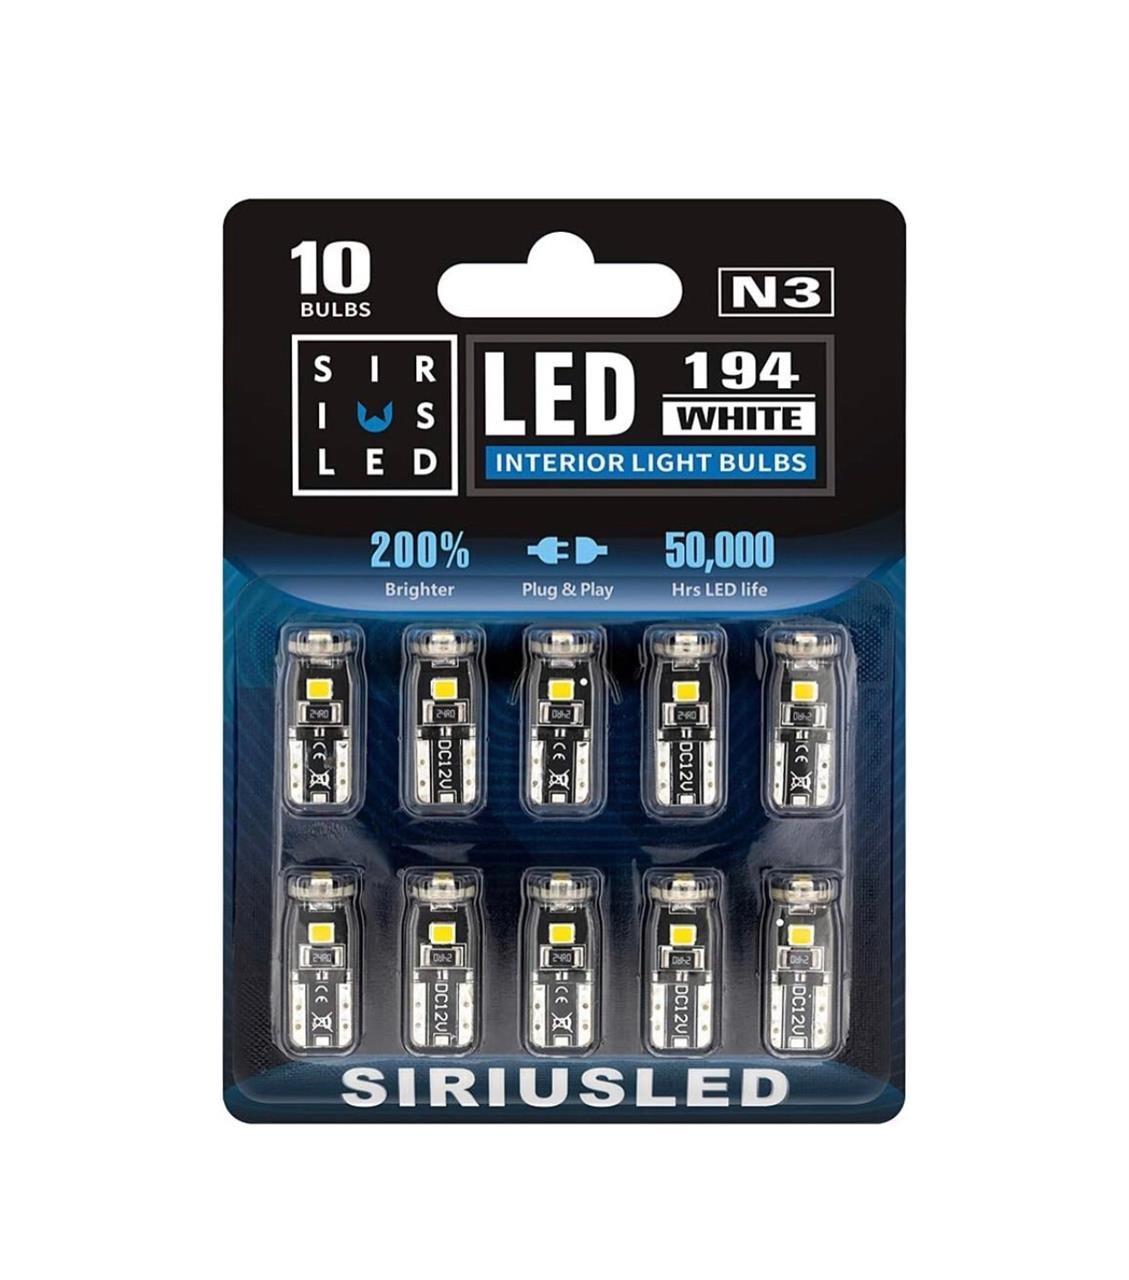 Pack of 10 SIR IUS LED 194 LED Bulbs Extremely